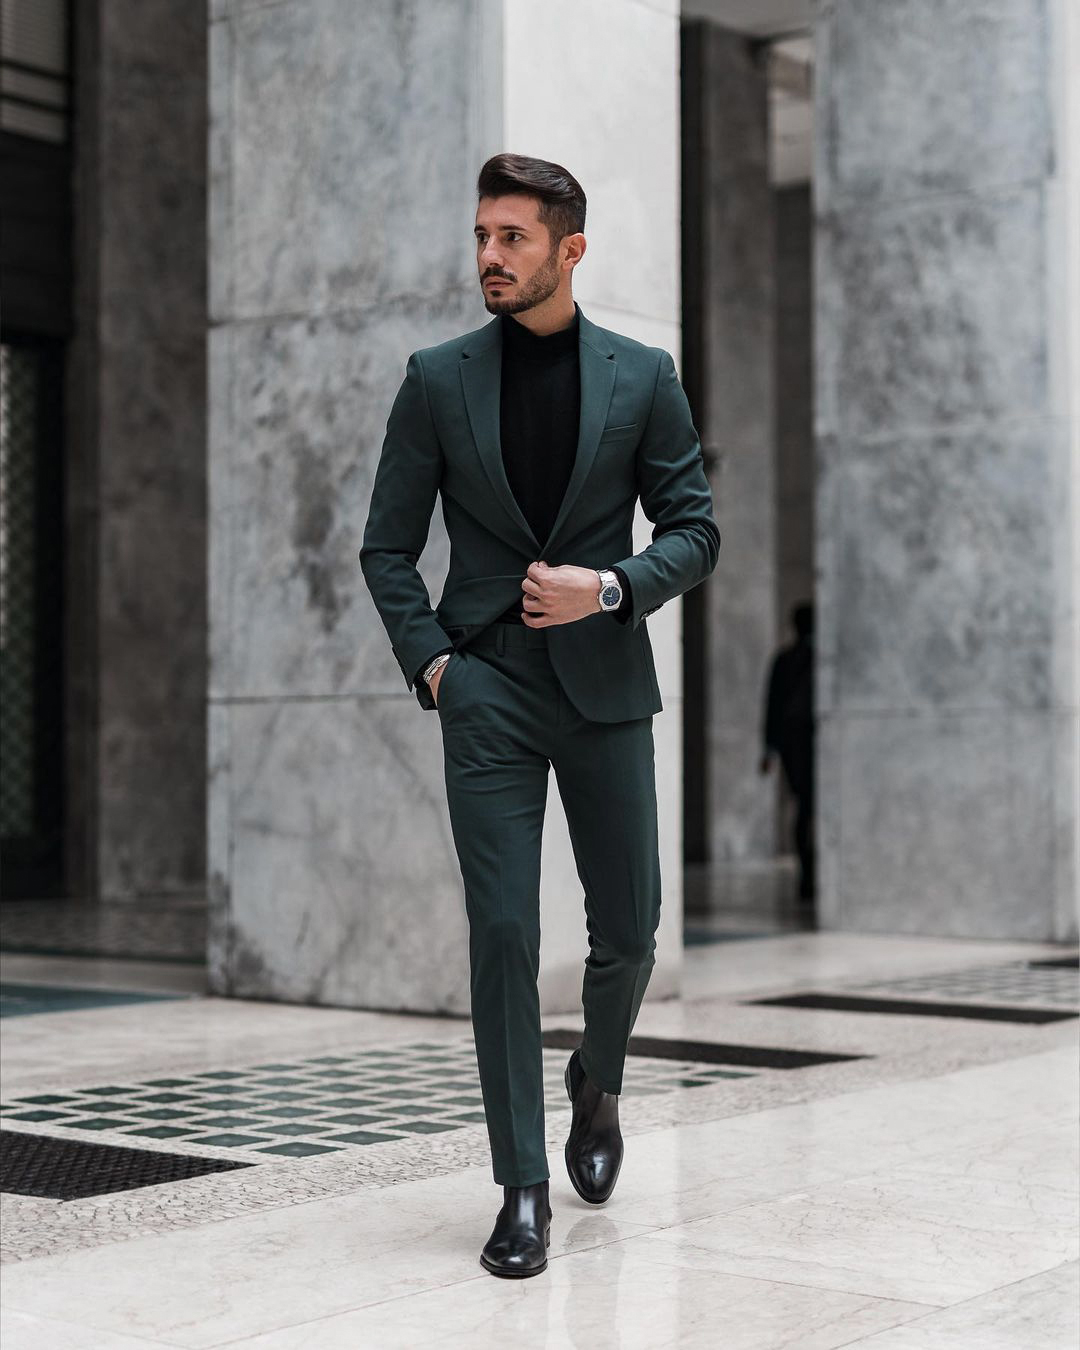 15 Suit Color Choices & How to Pick the Right One Suits Expert